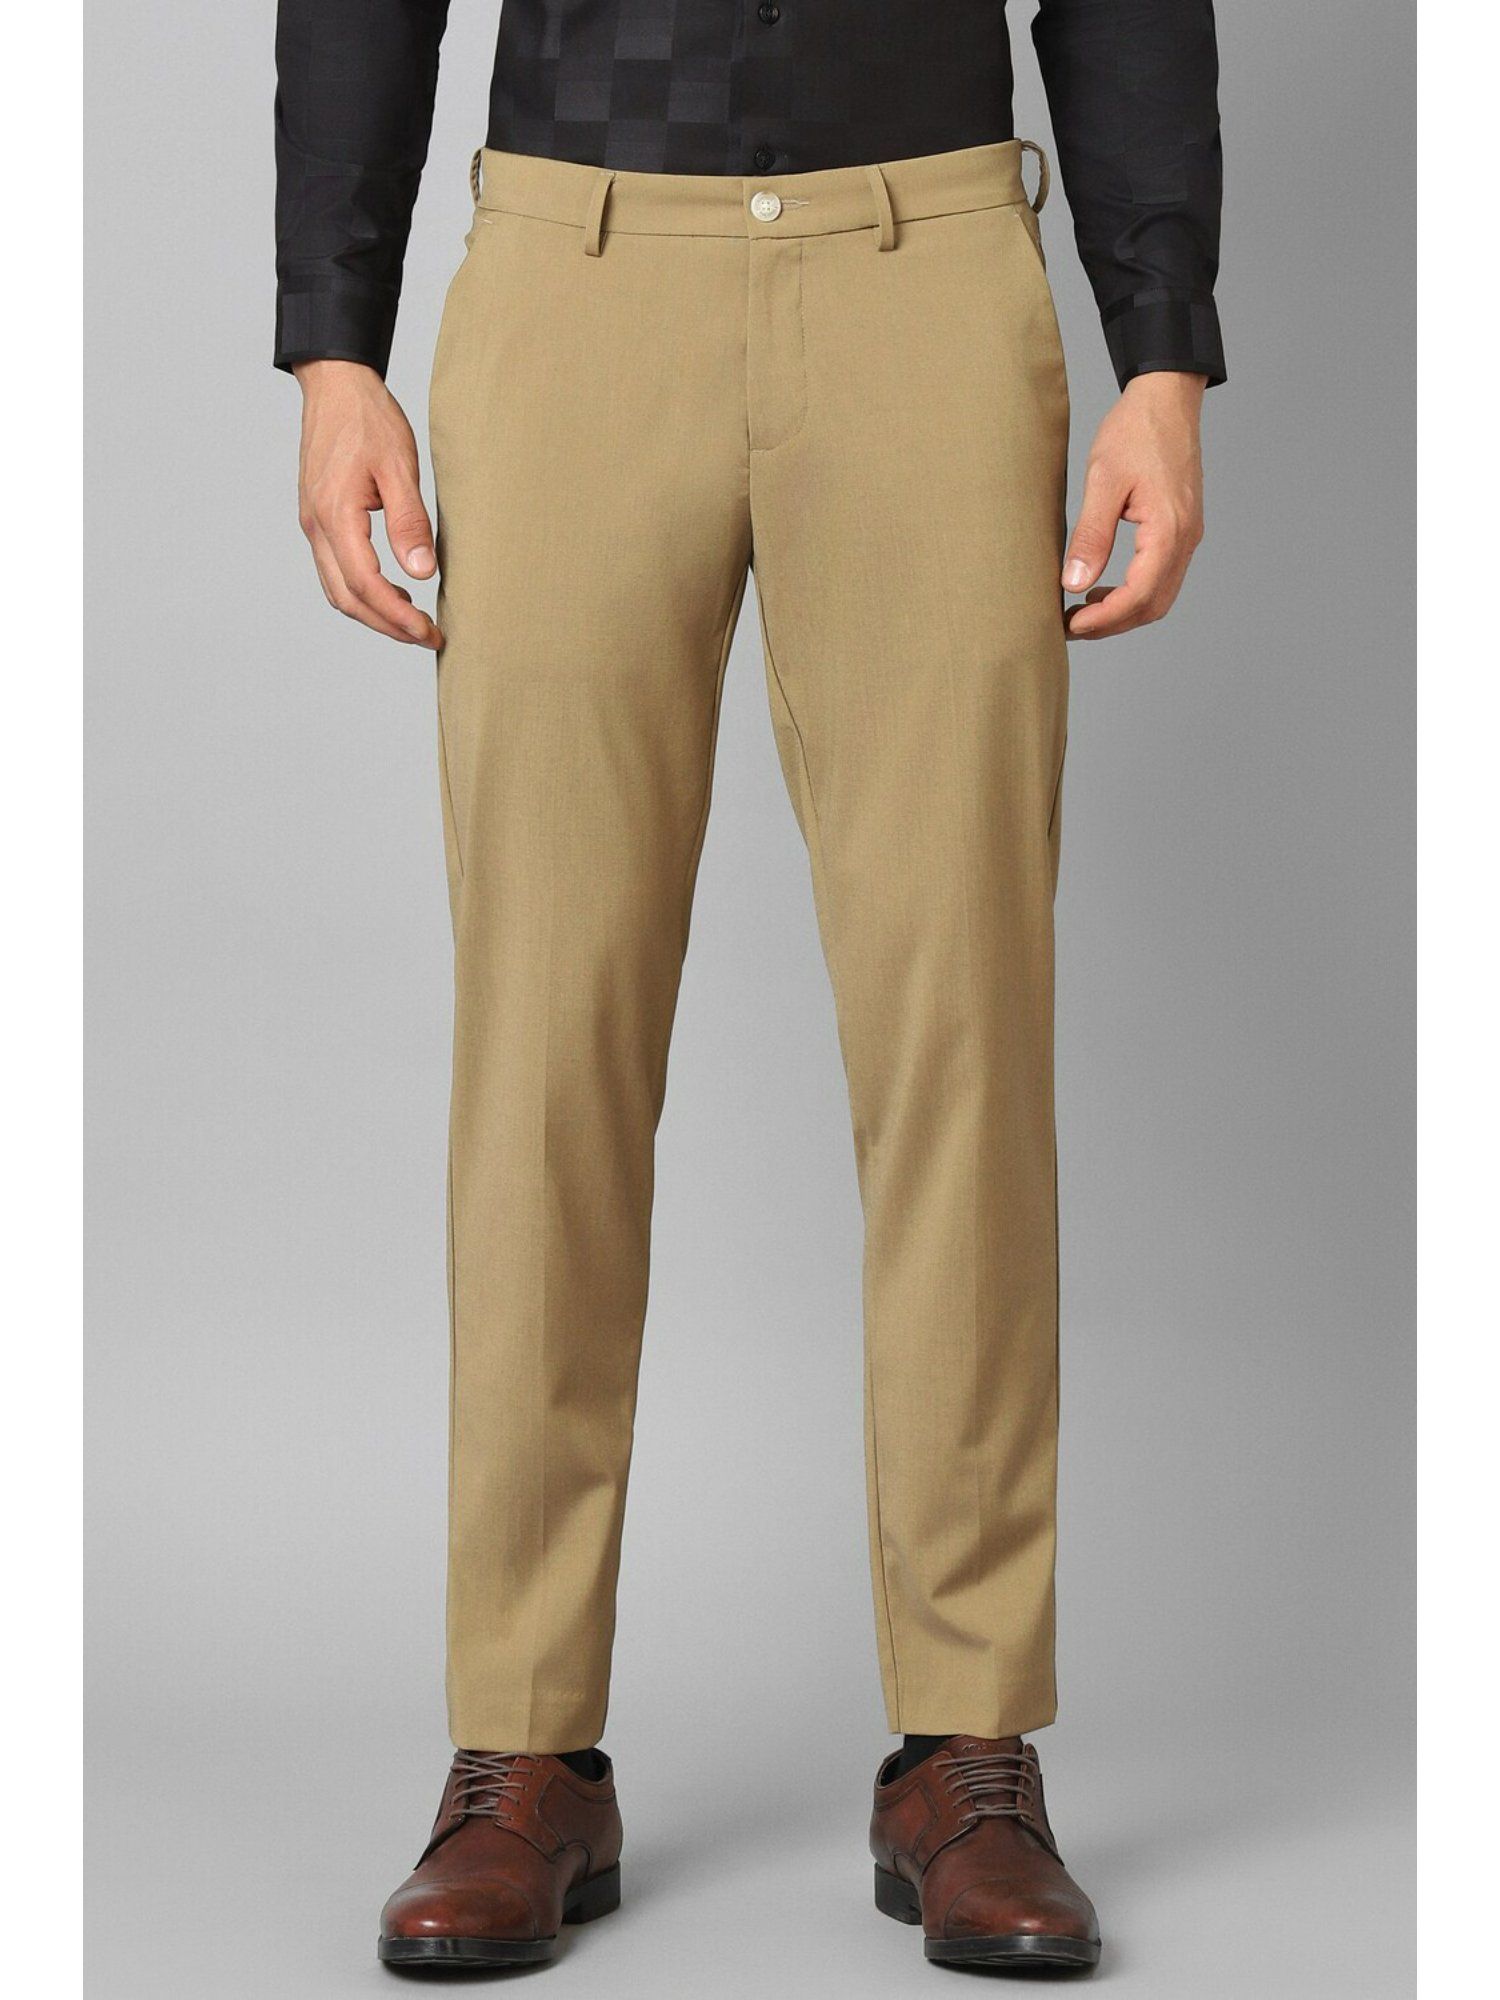 Allen Solly Navy Blue Slim Fit Trousers